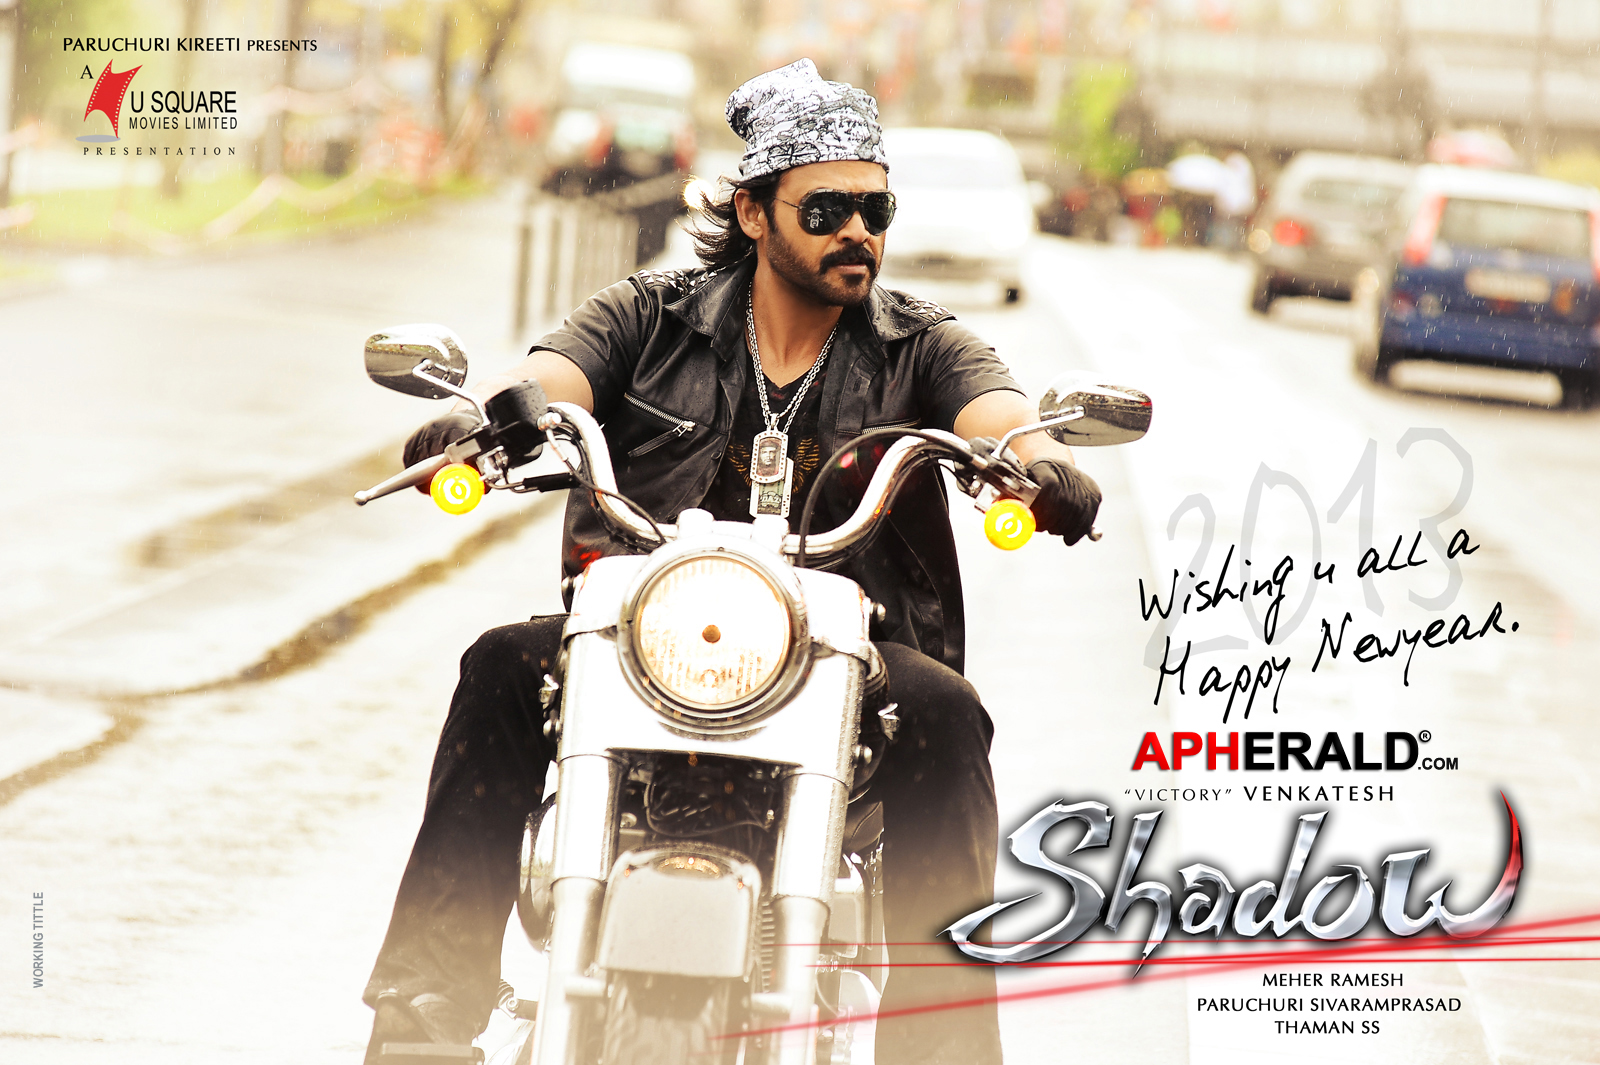 Shadow Movie Latest Posters